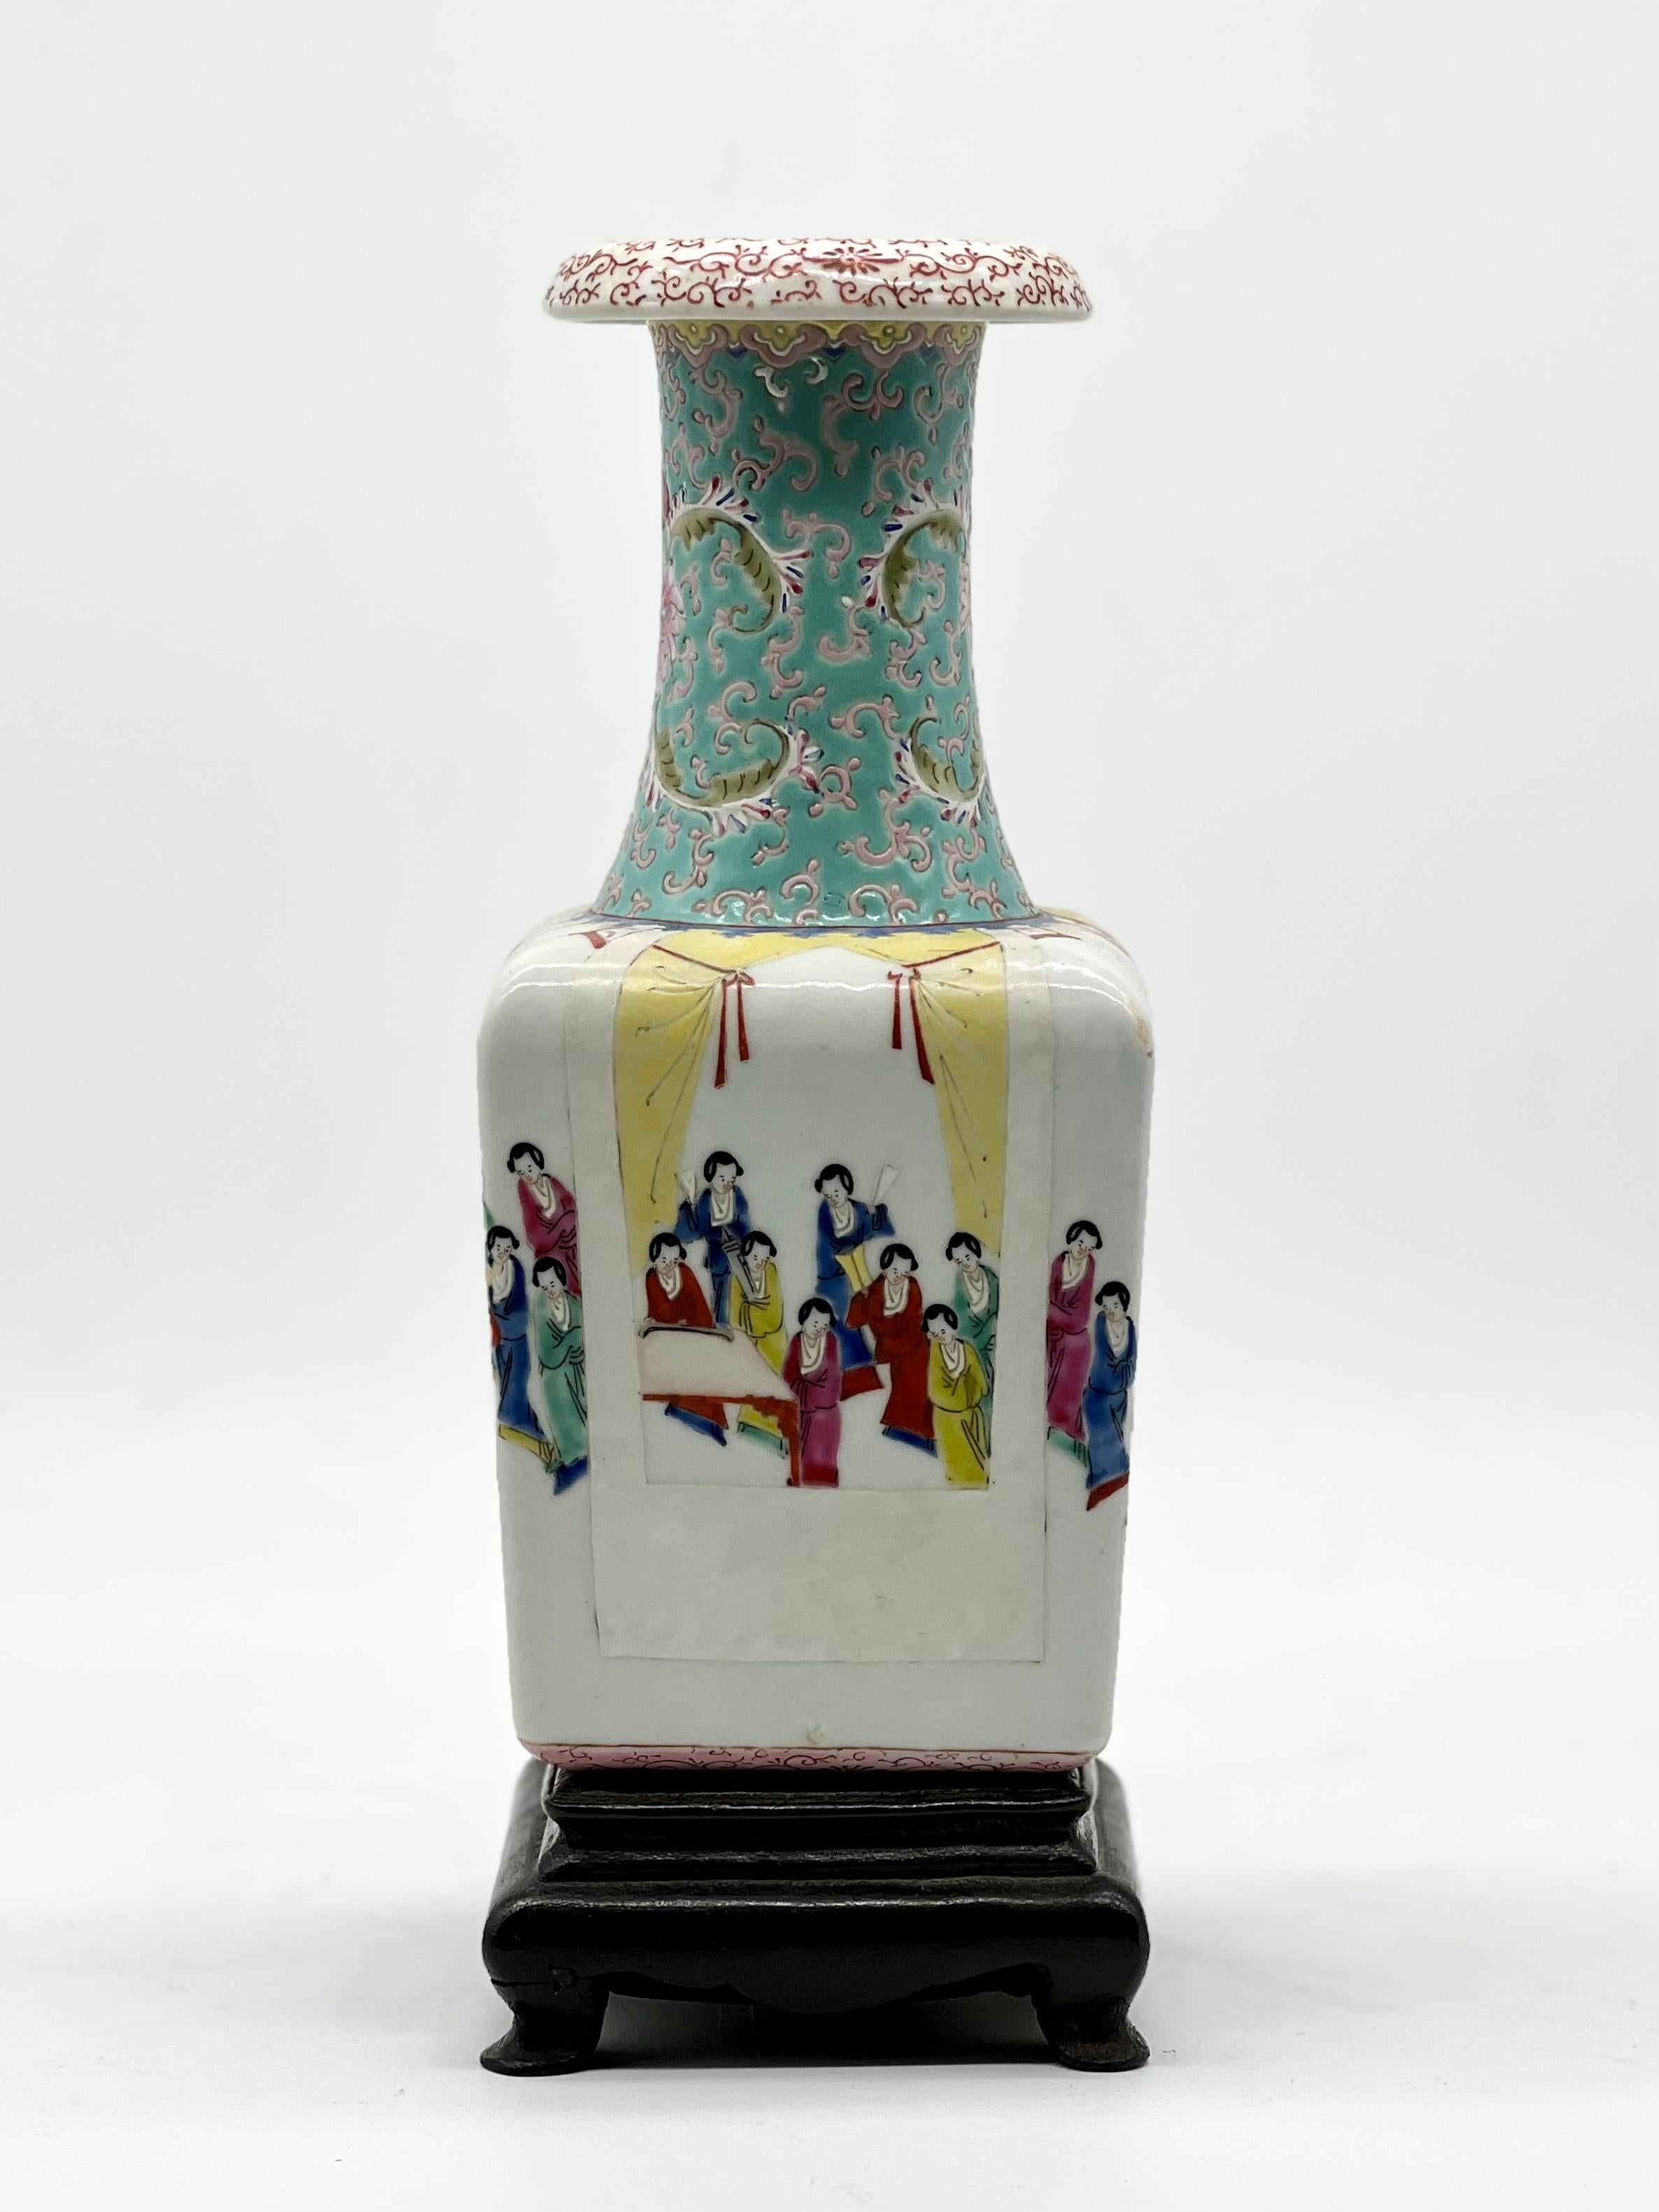 19th Century Fine Chinese Famille-Rose Vase with Women Enjoying Scholarly Pursuits, 19th C